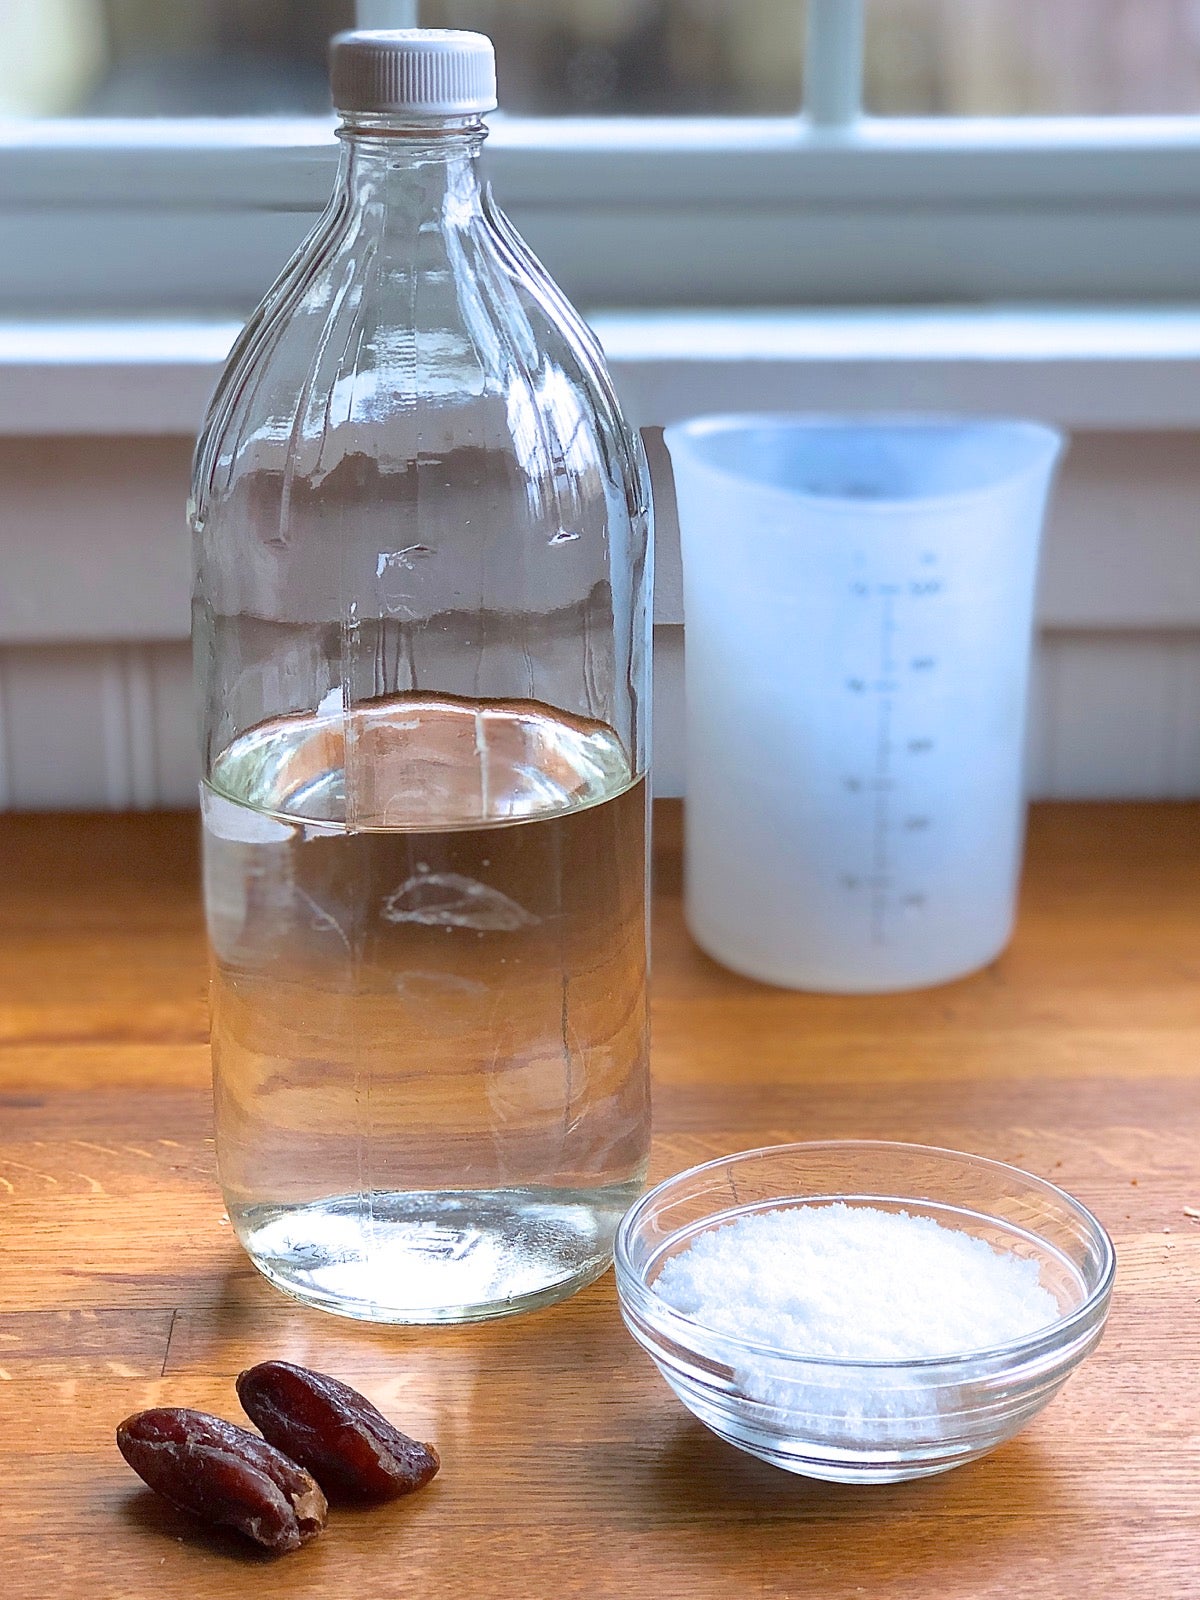 Dried dates, sugar, and water ready to pour into a 32-ounce bottle.